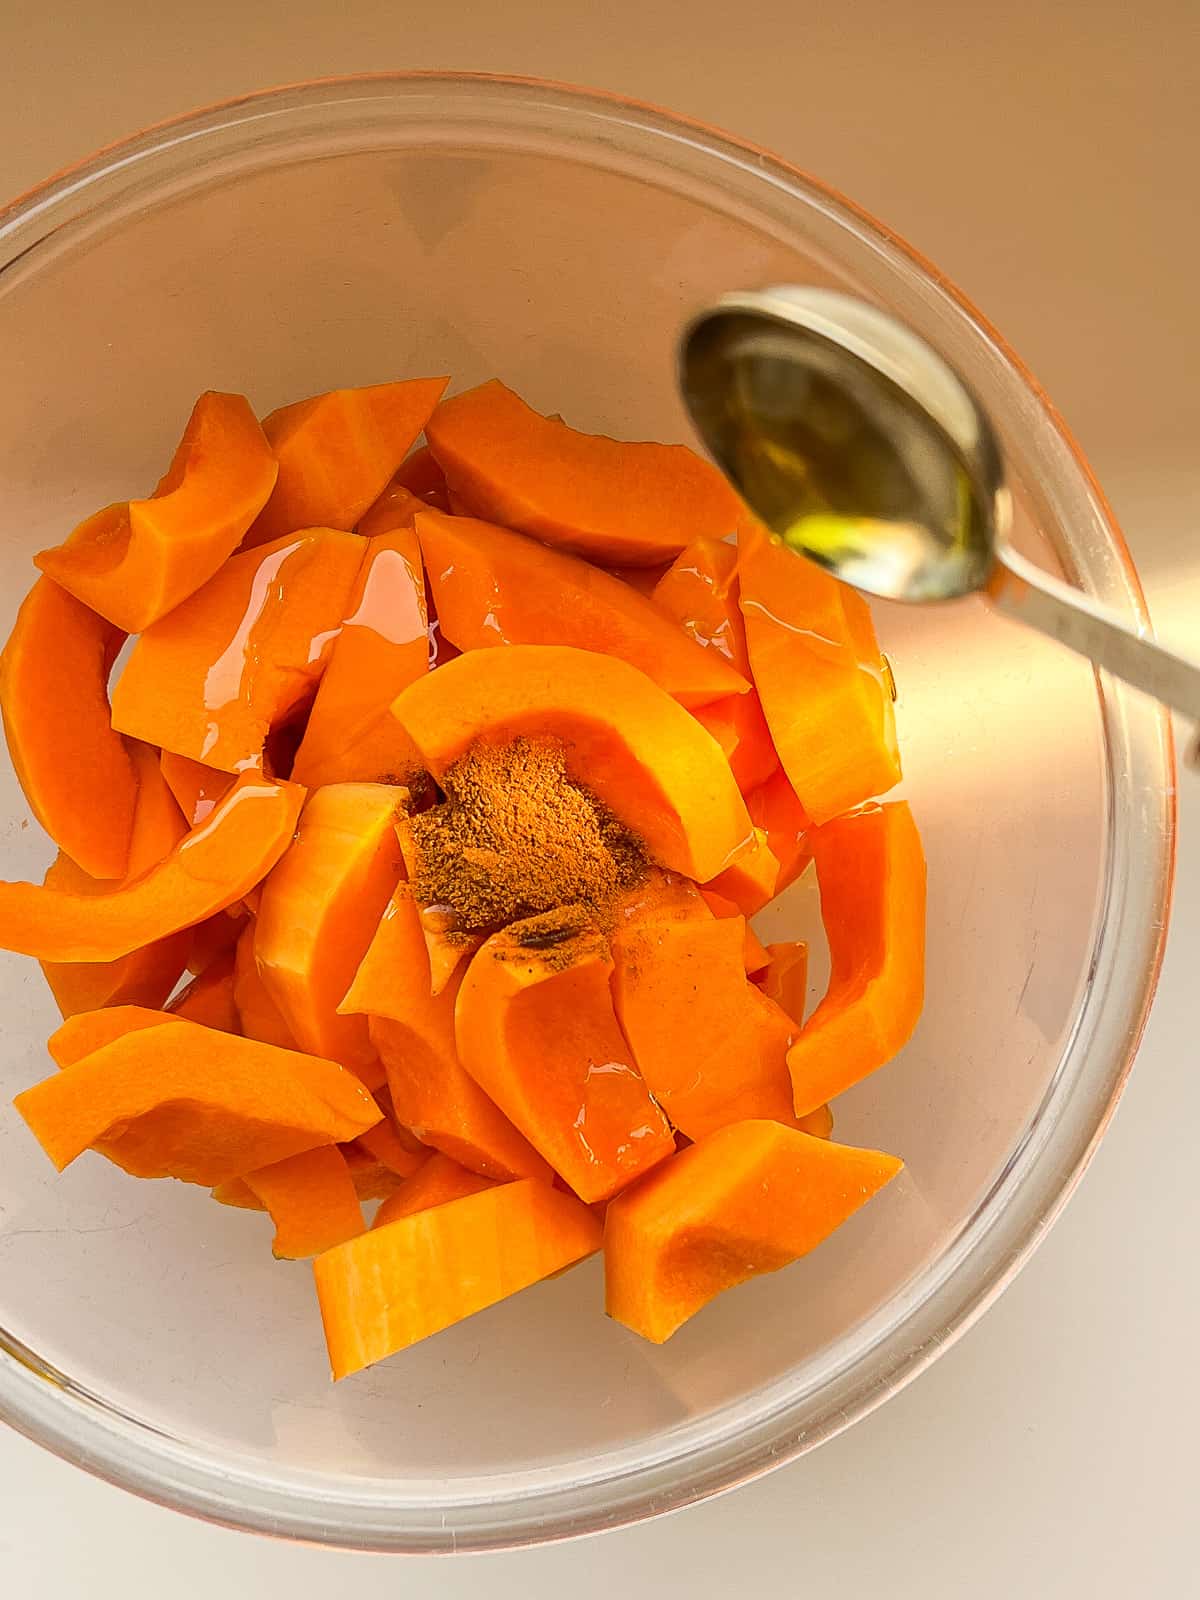 An image of olive oil being added to a bowl of butternut squash wedges.